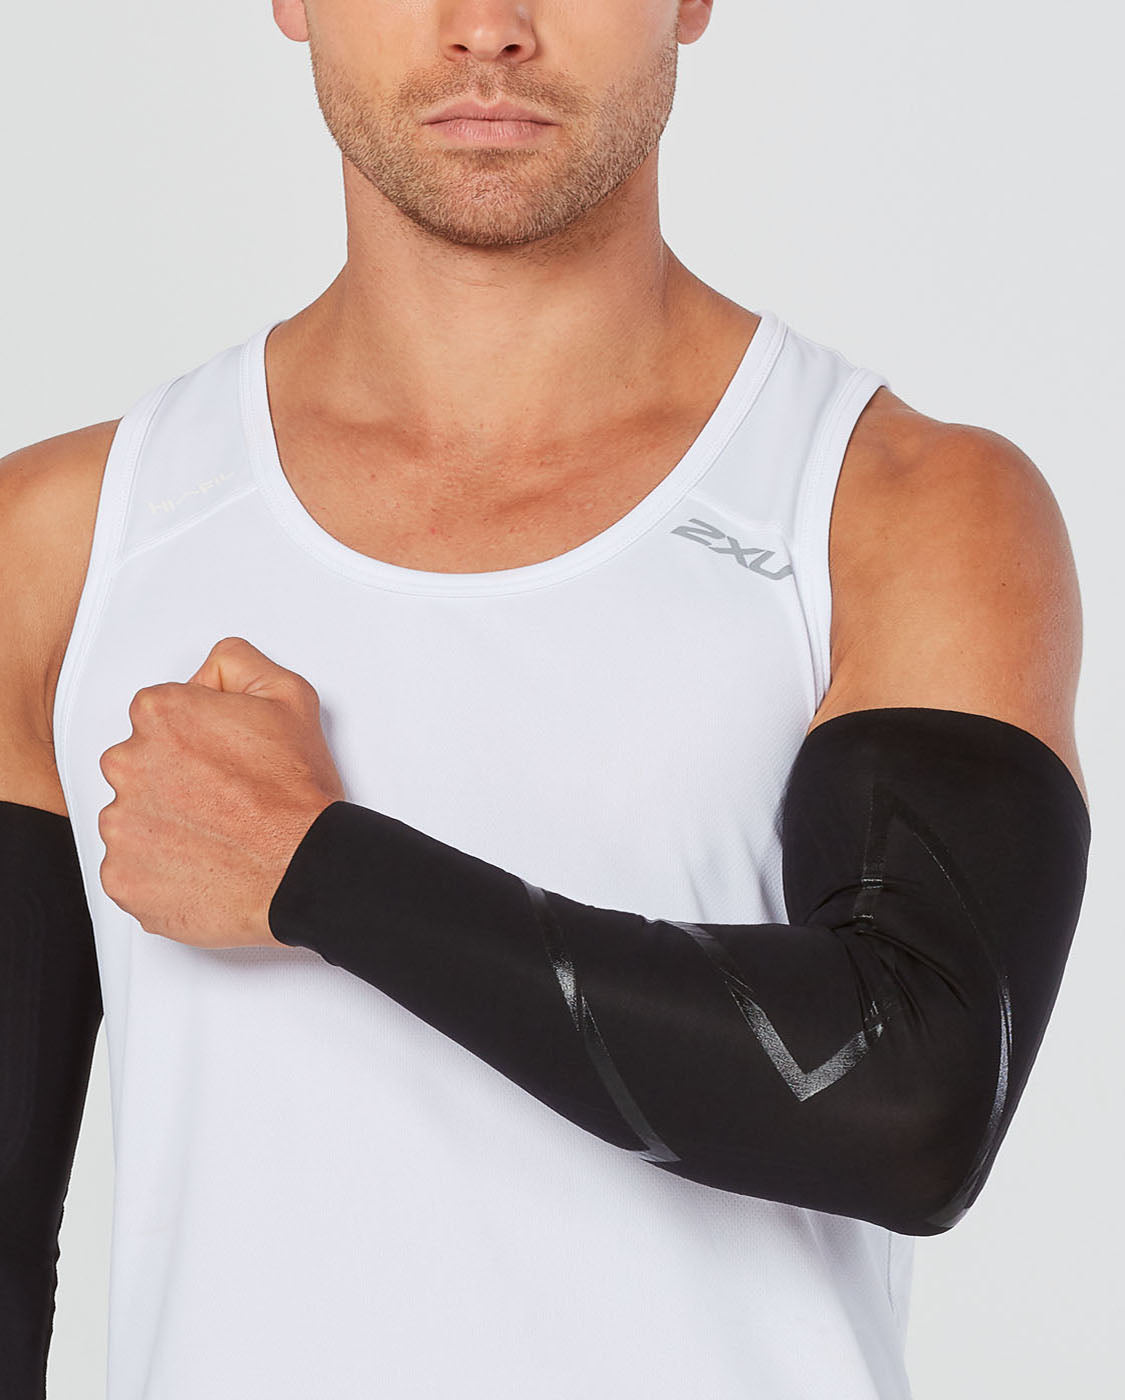 Non-Compression Protective Sleeves - Forearm - Light Weight (Black)